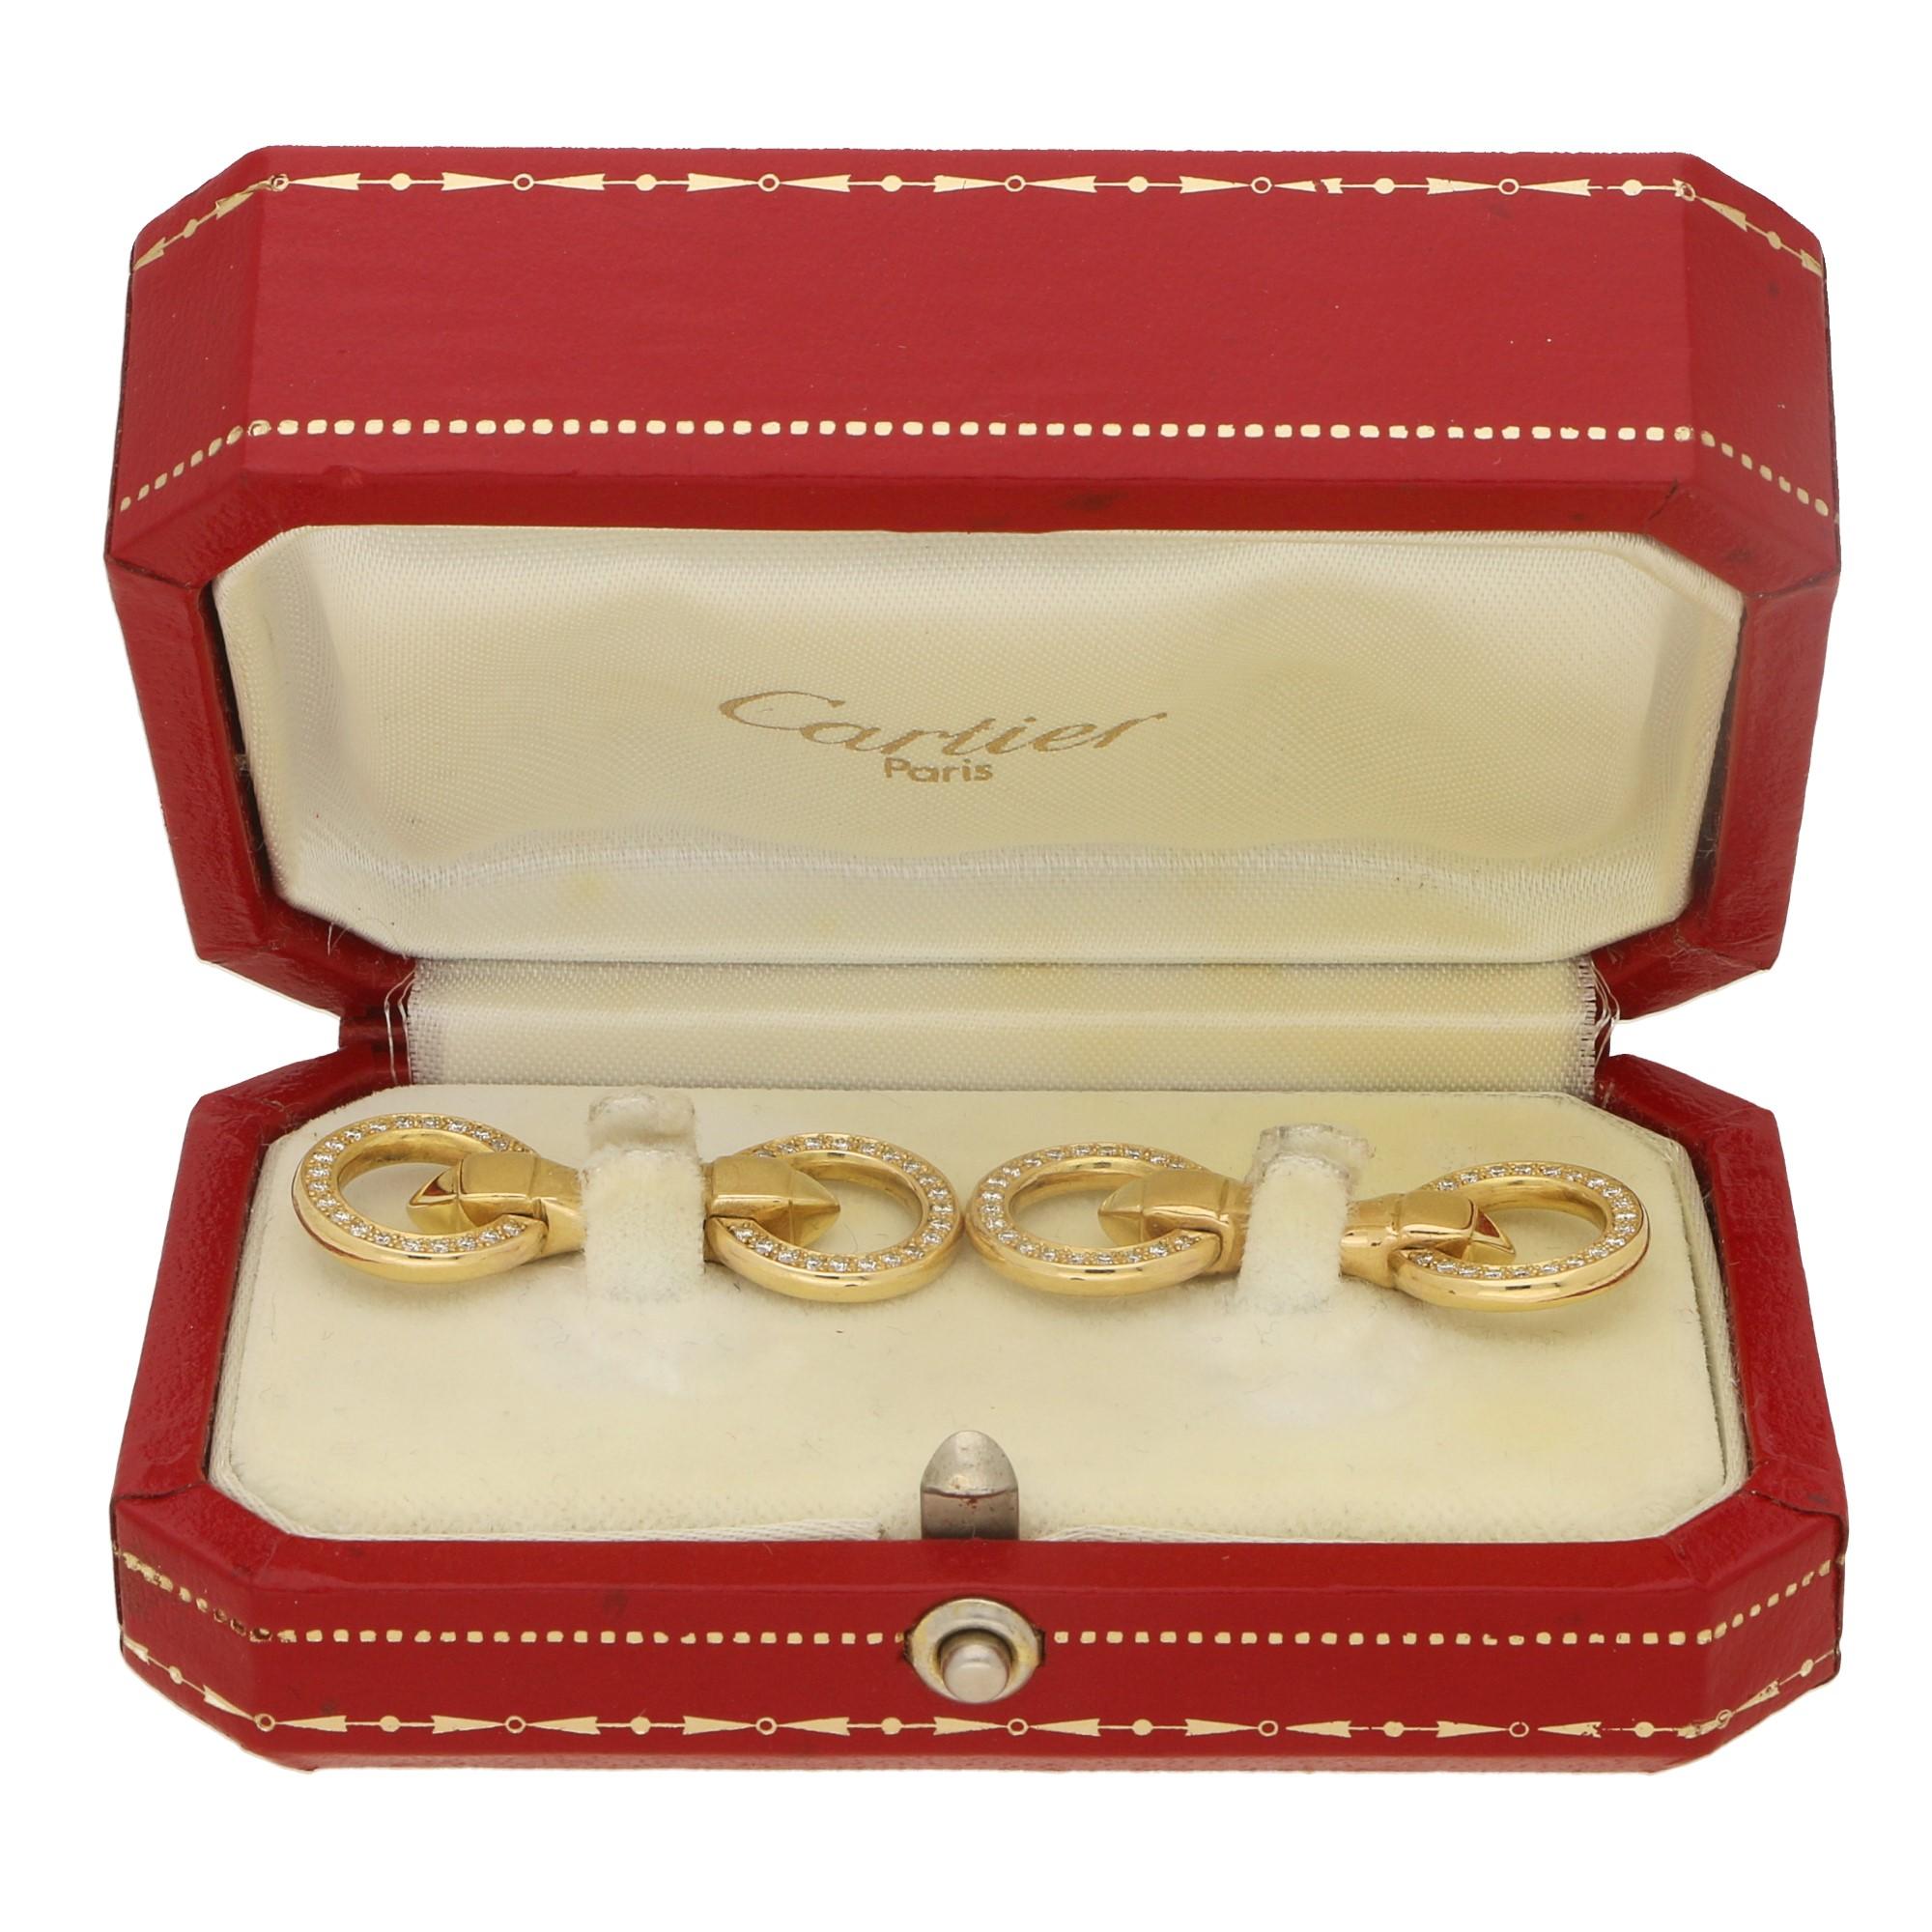  A lovely pair of signed Cartier Paris diamond double sided circle cufflinks set in 18 carat yellow gold.

These cufflinks display classic Cartier elegance with 21 diamonds mille-grain set to either side of the cufflink (84 diamonds in total). These